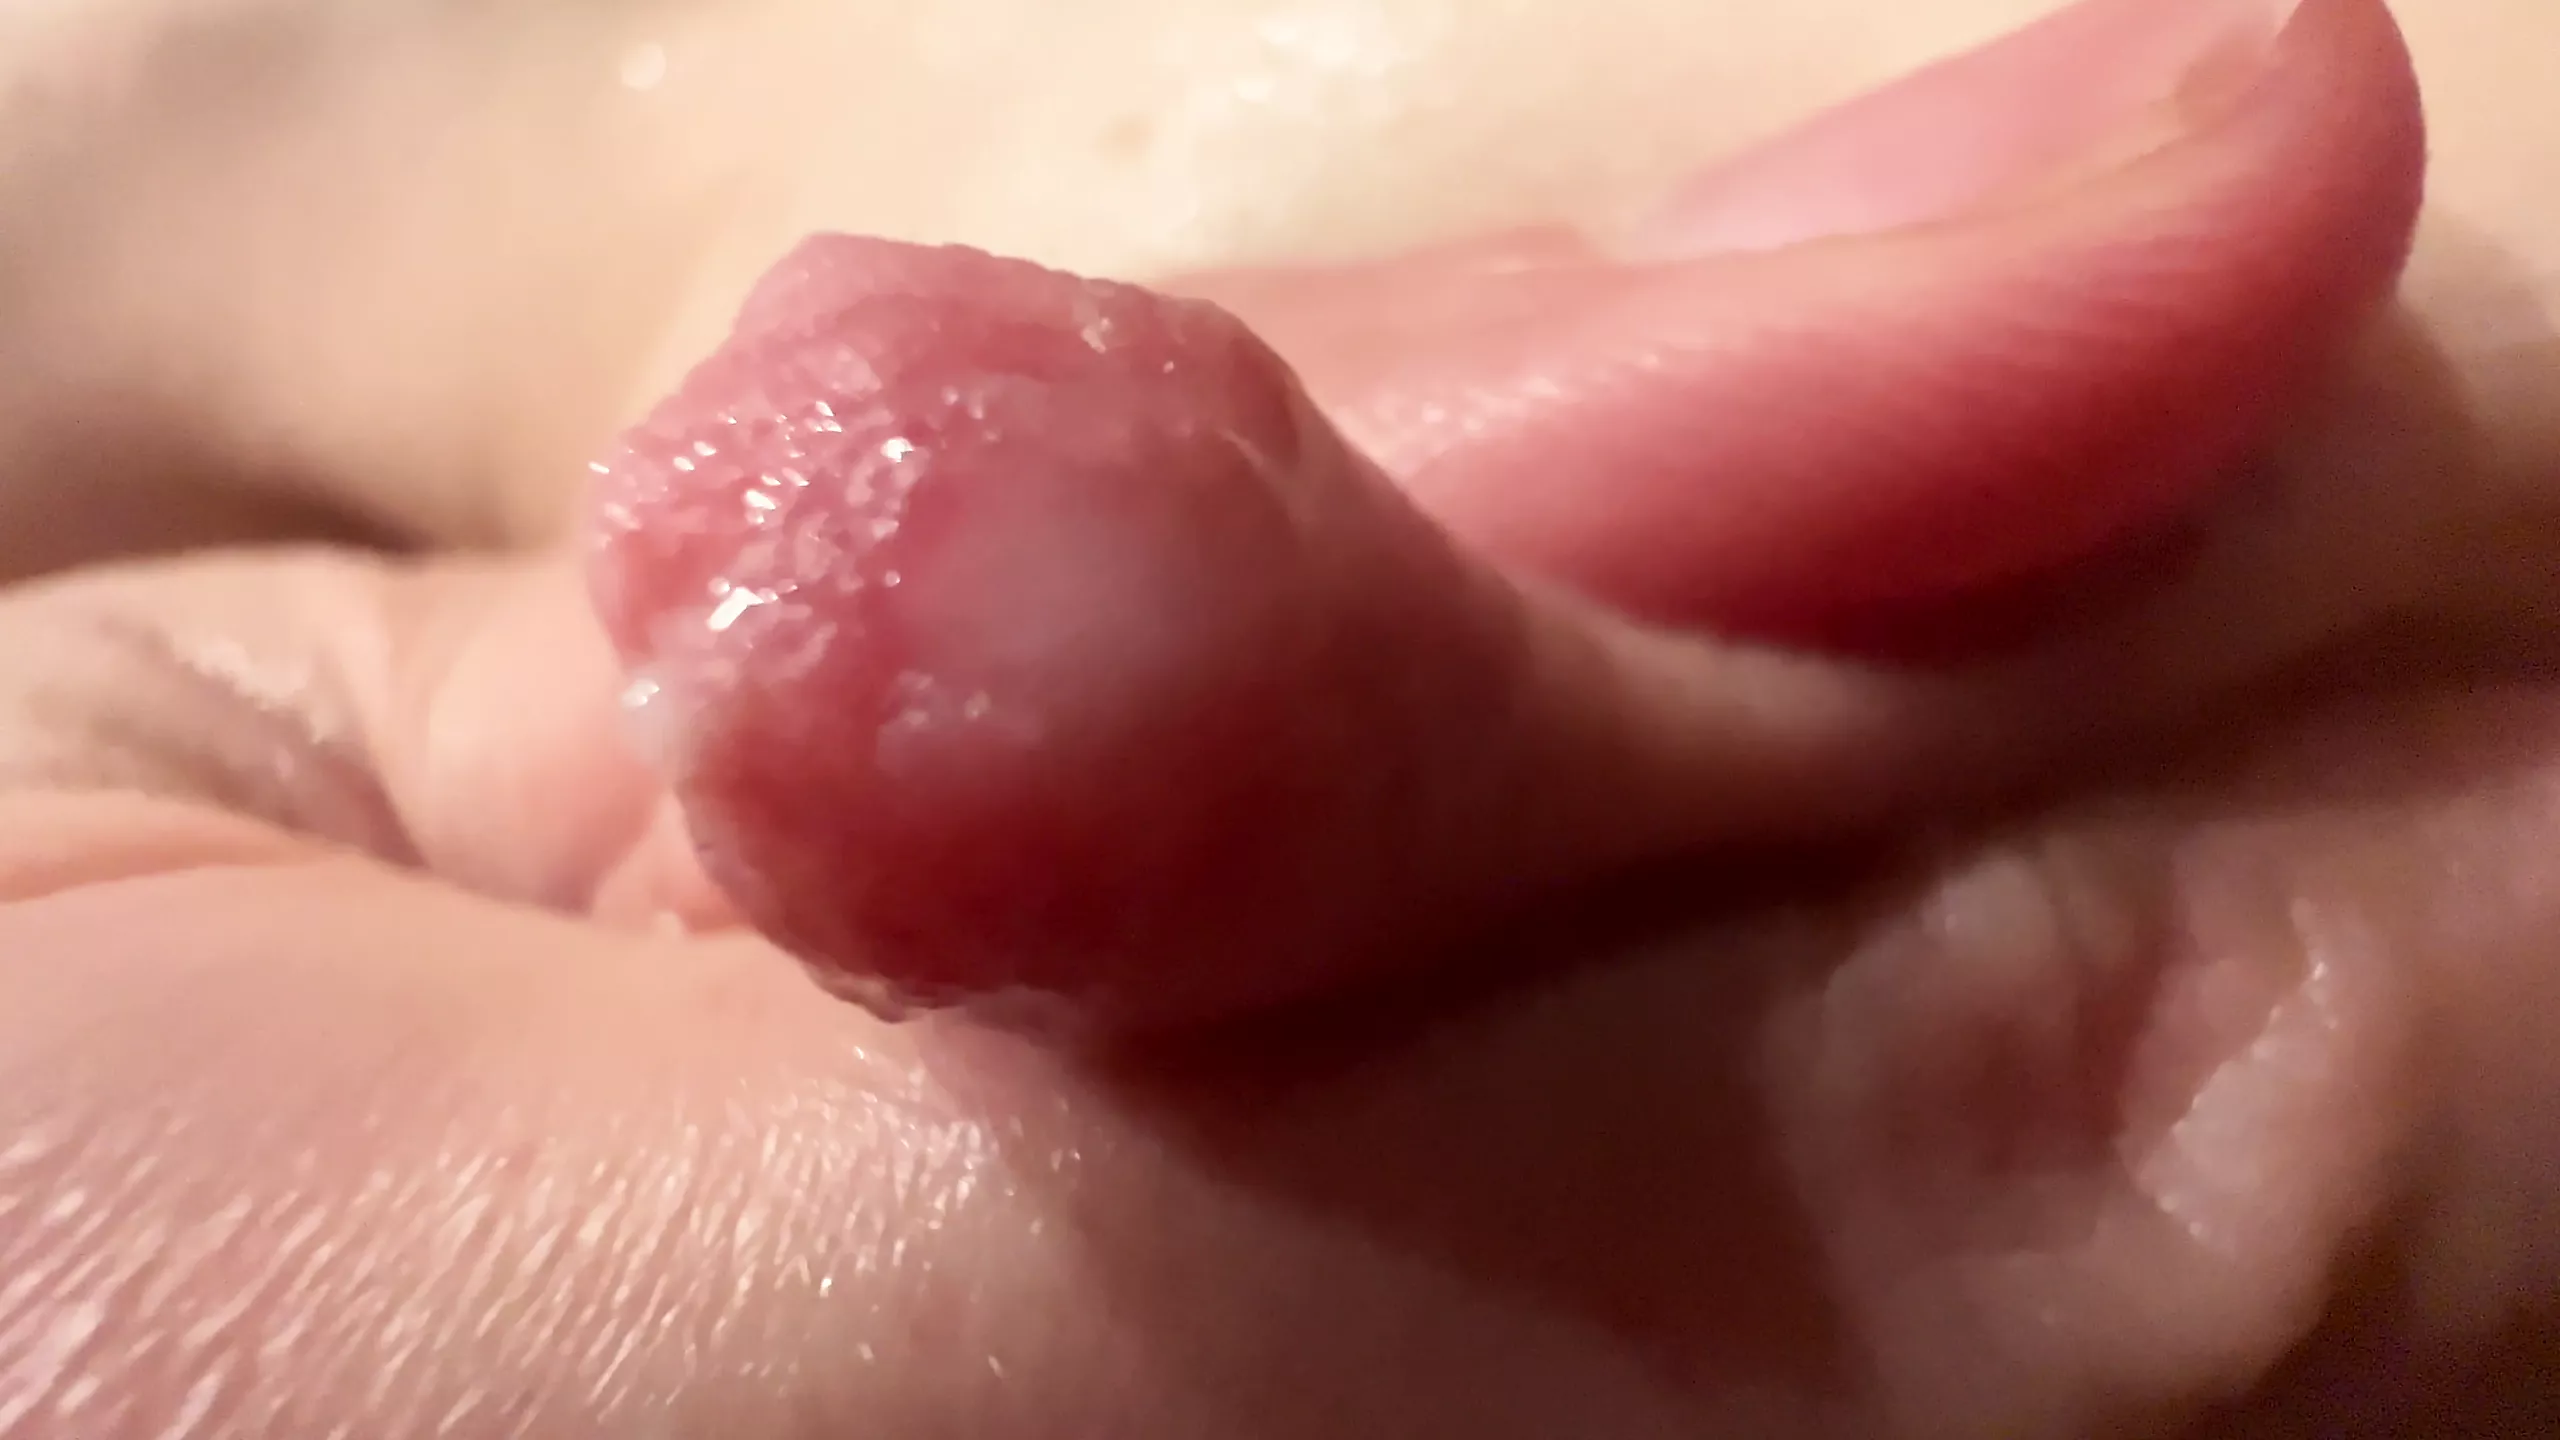 Milky Lactating Nipples - Female Breast Milk and Nipple Close-up, Porn ae | xHamster